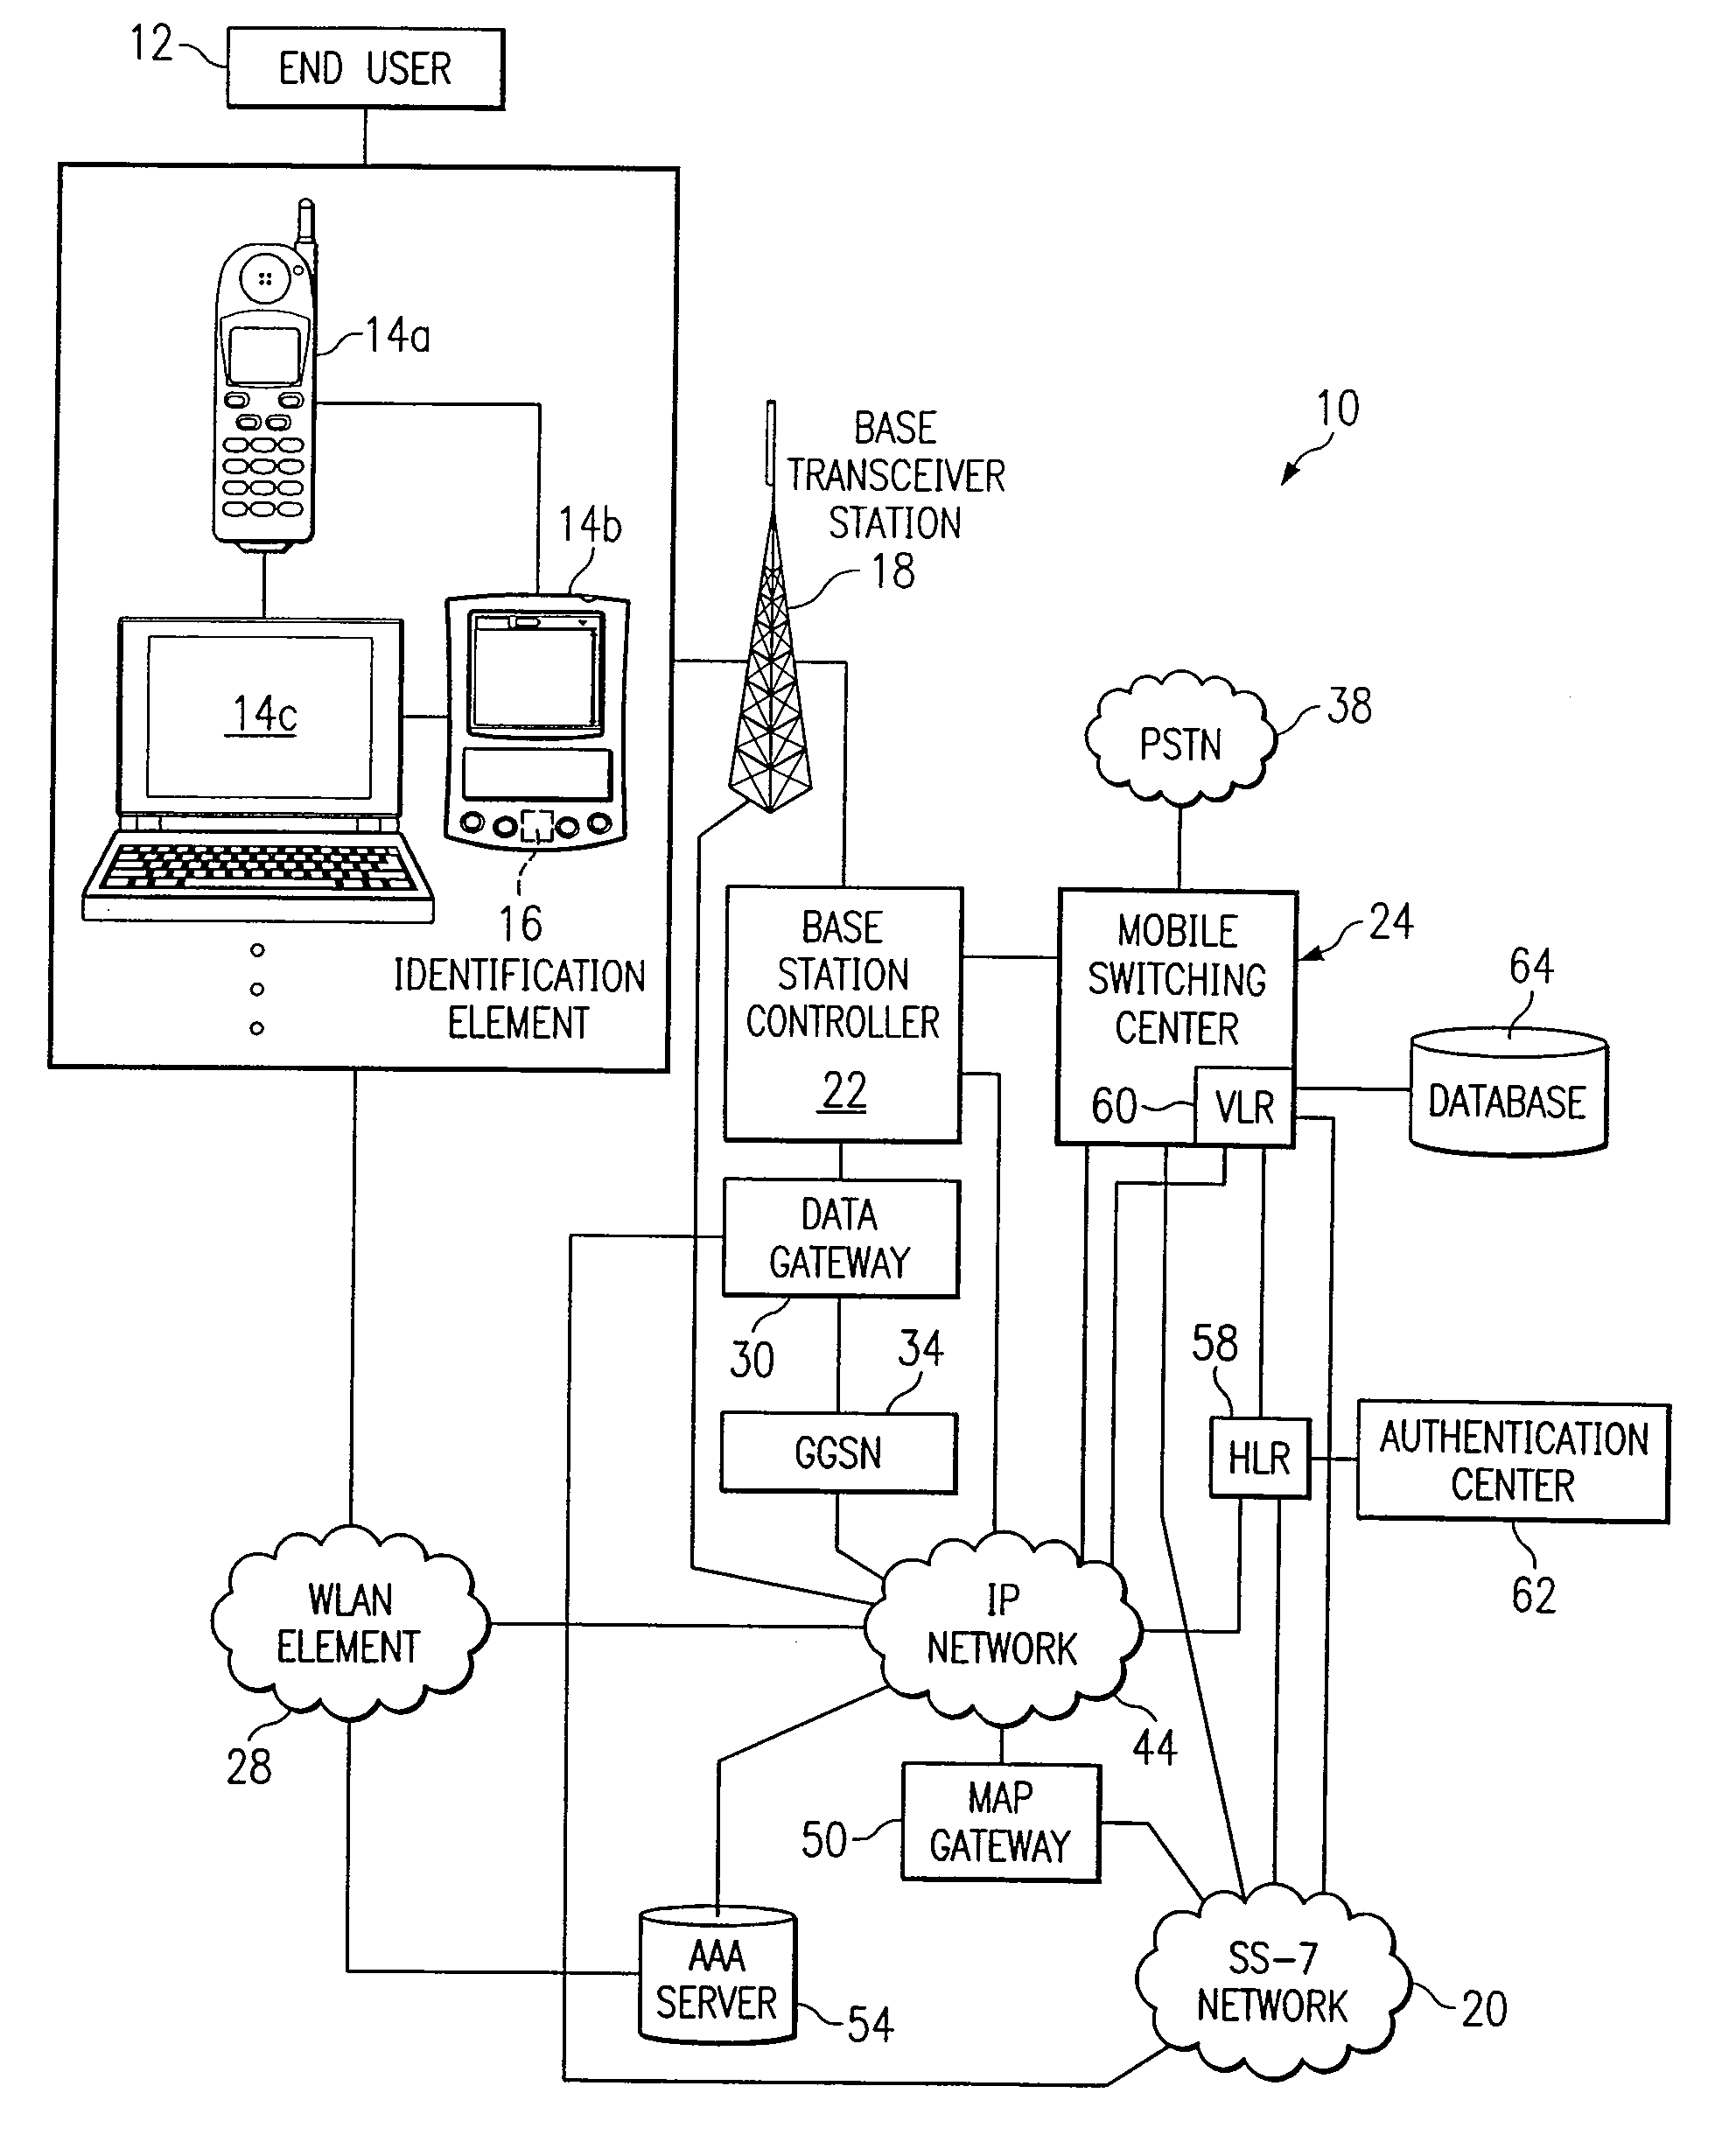 System and Method for Authenticating an Element in a Network Environment